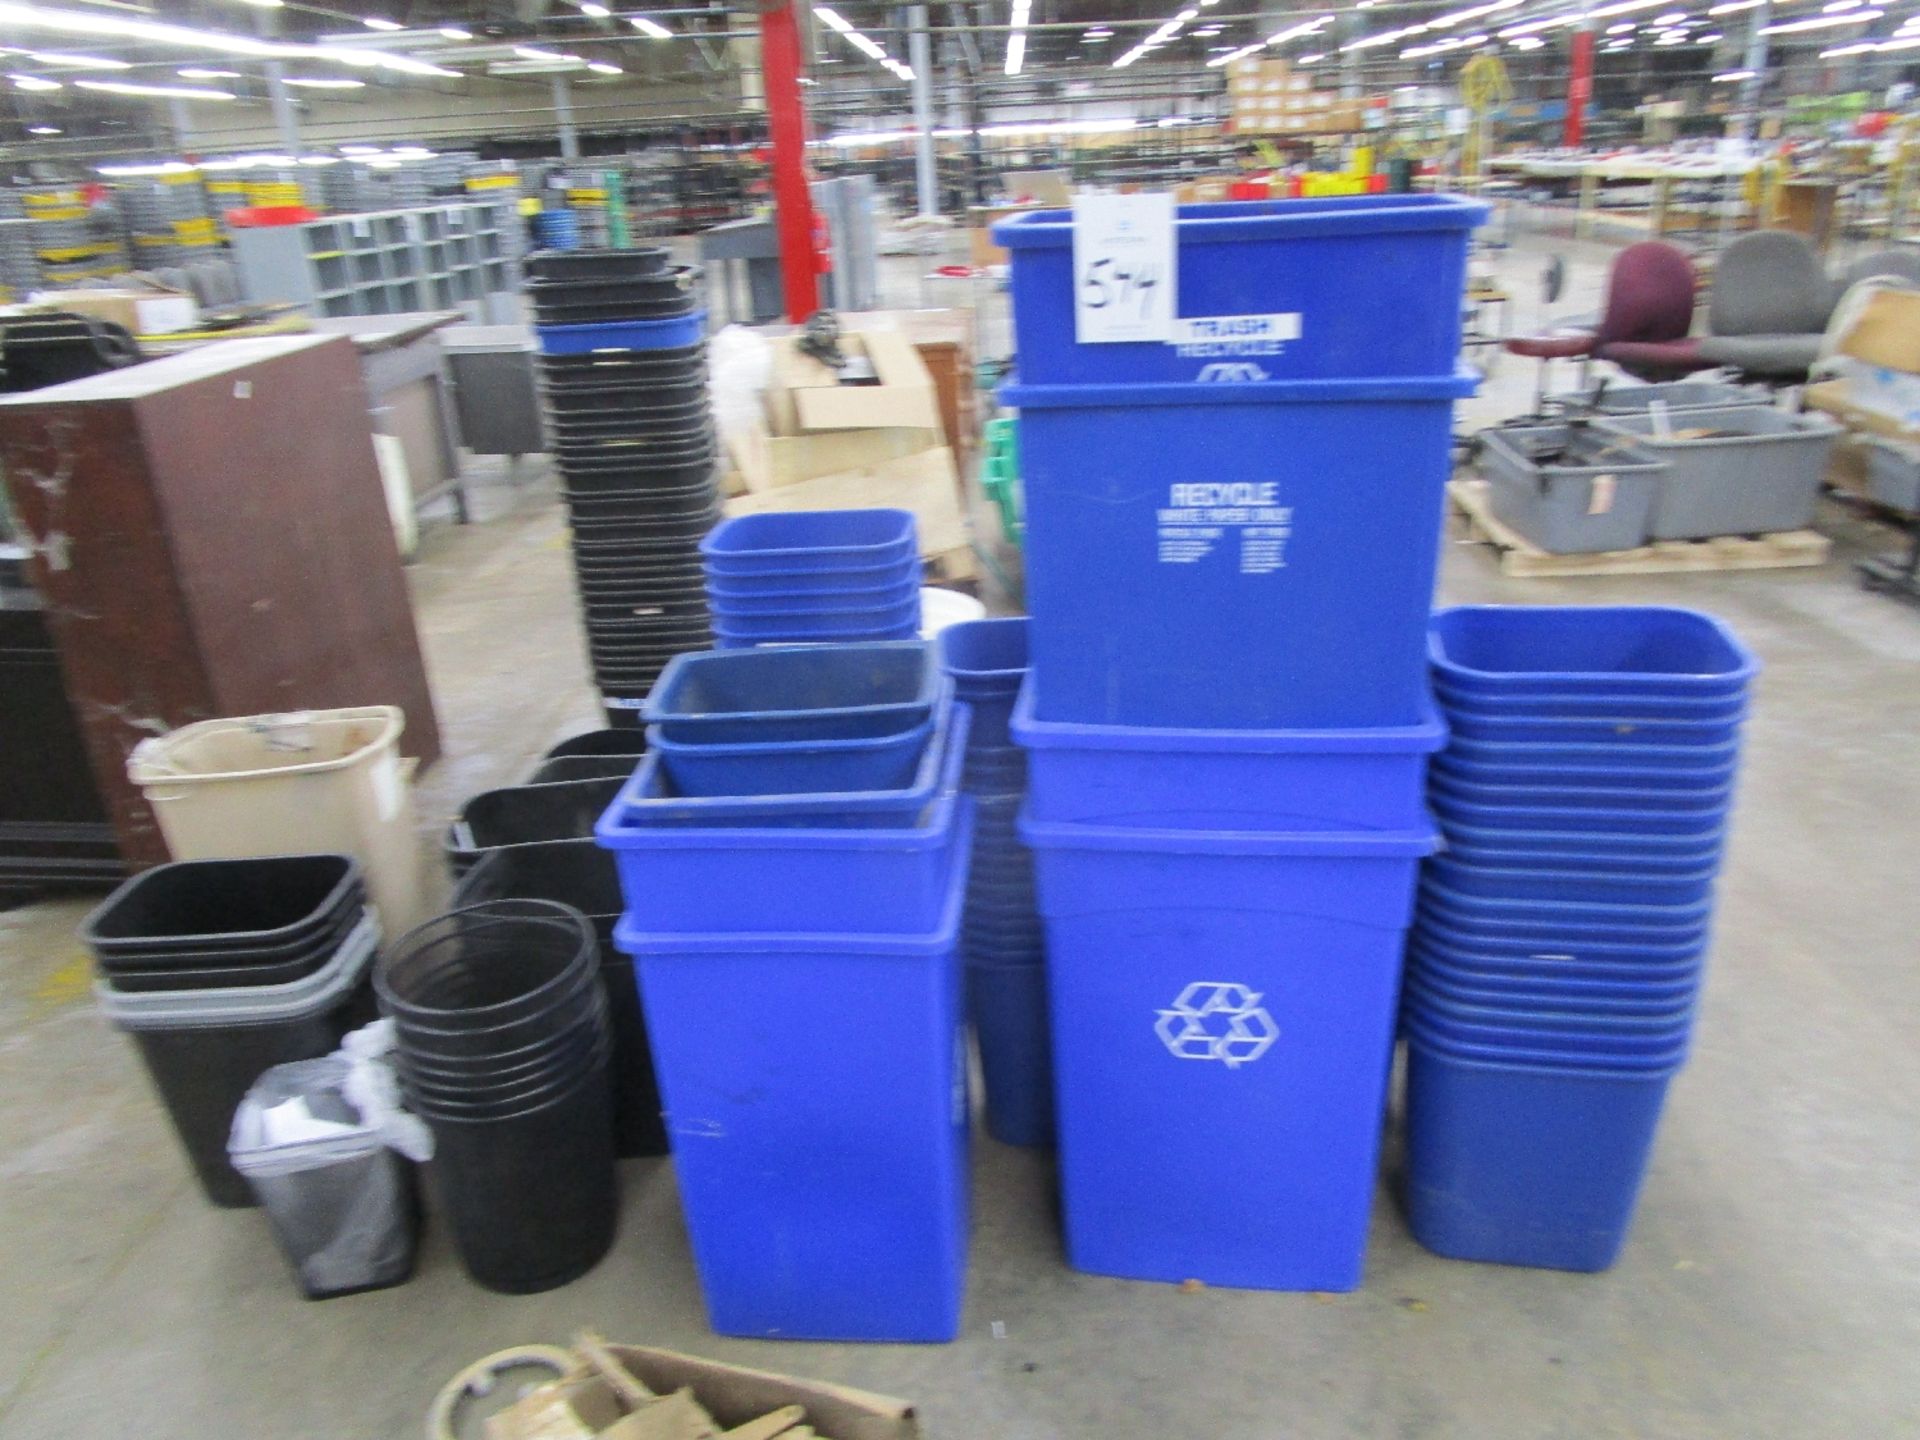 Lot of Waste Cans